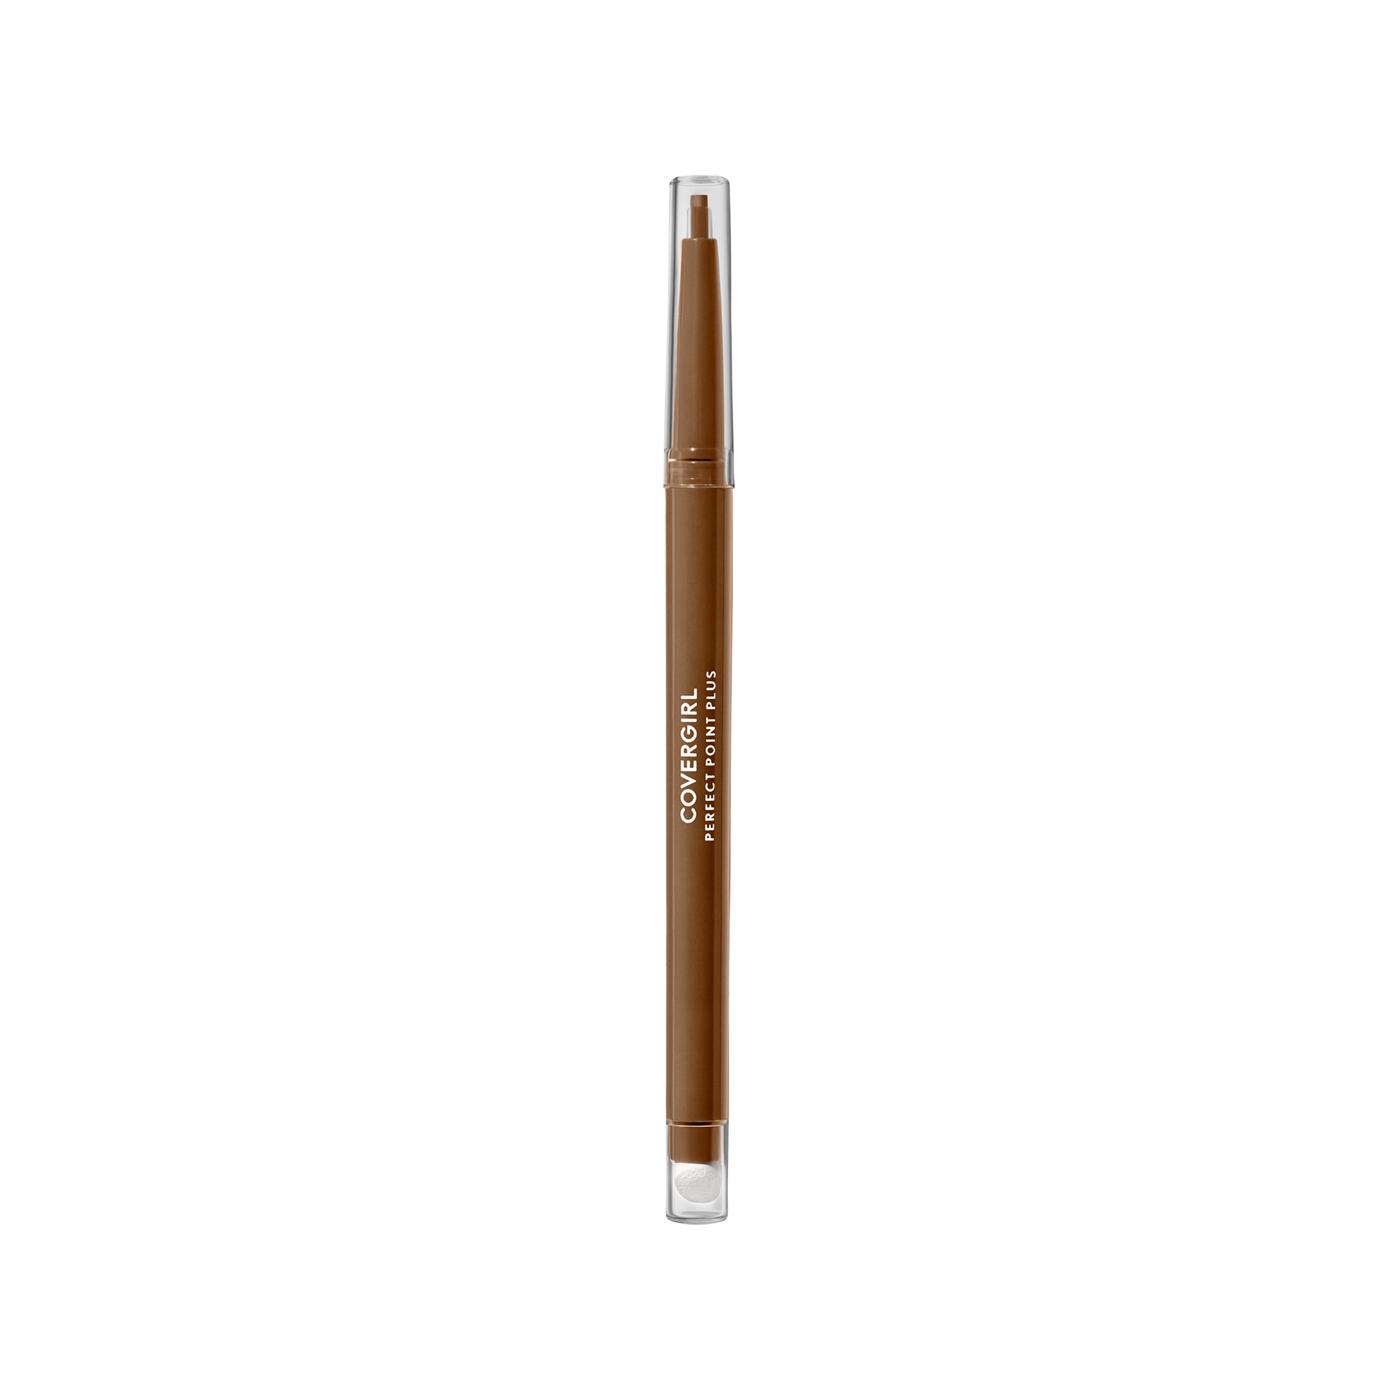 Covergirl Perfect Point Plus Eye Pencil - Toffee; image 3 of 9